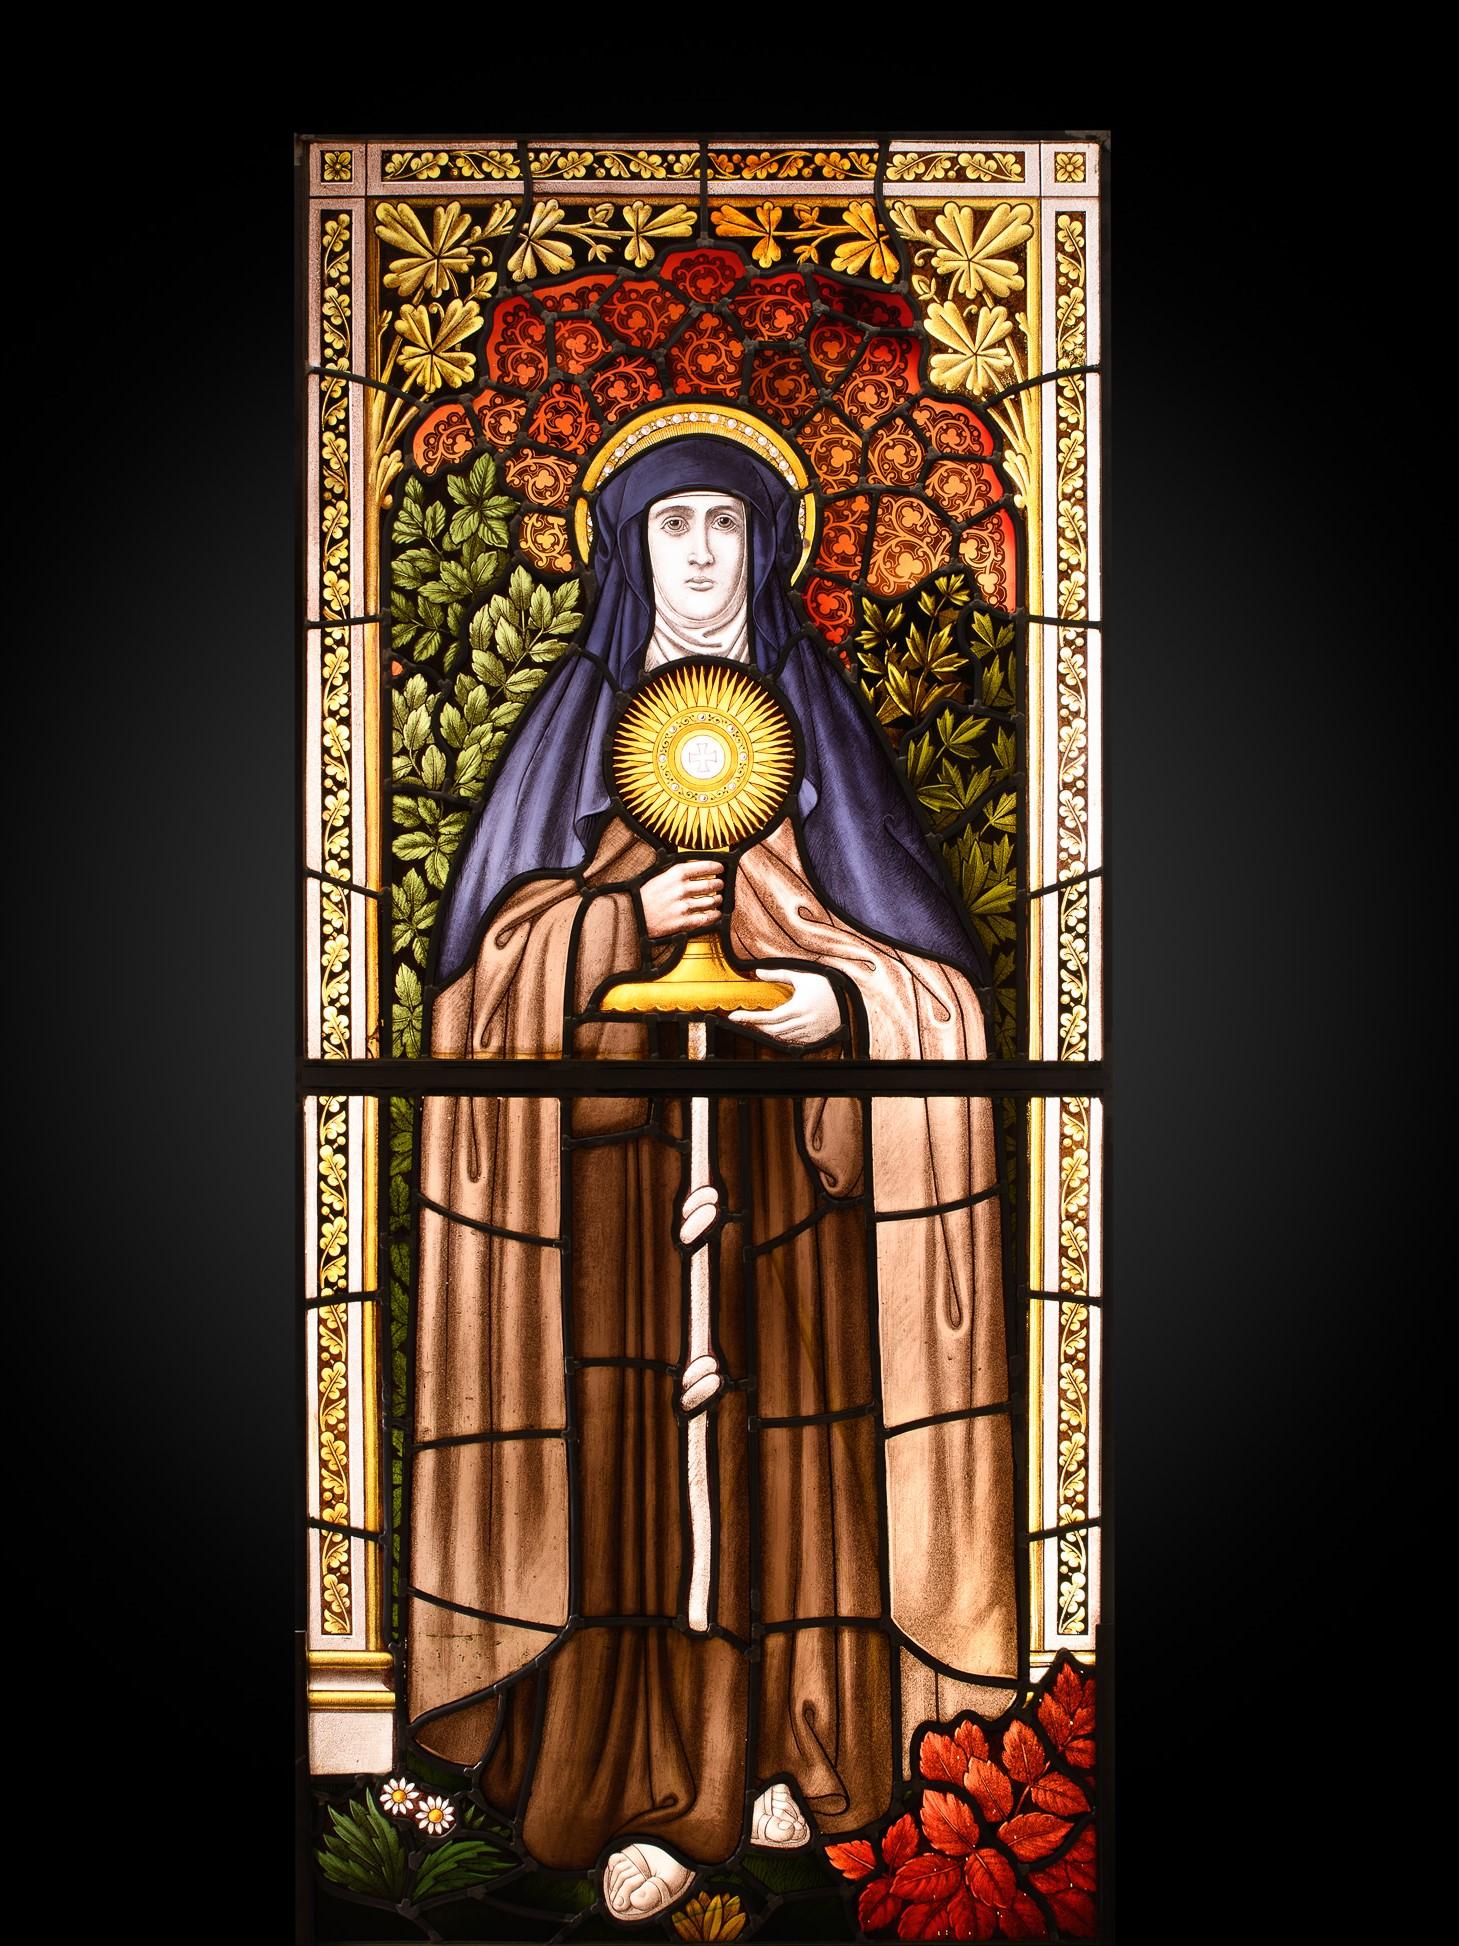 Neo-Gothic Stained Glass Window with Saint Clare of Assisi. - Art by Unknown